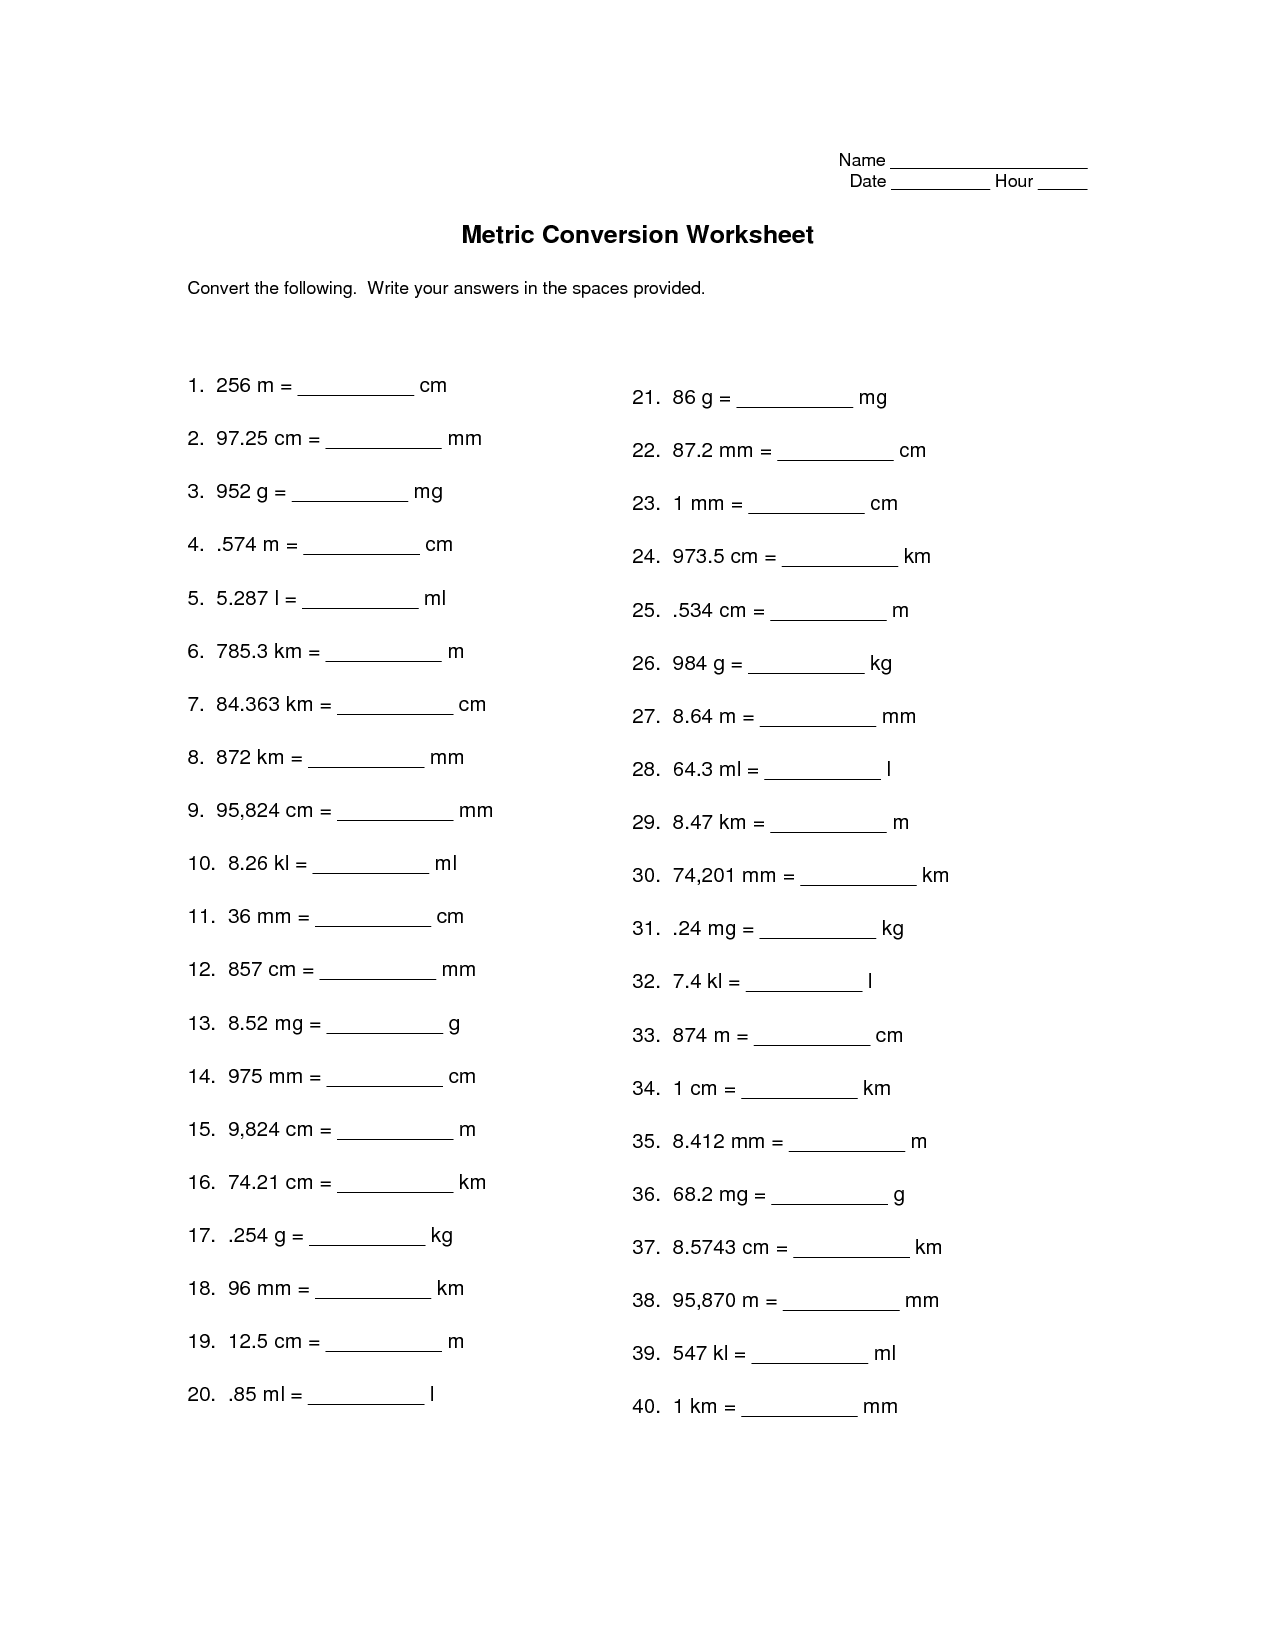 metric-conversion-worksheet-with-answer-key